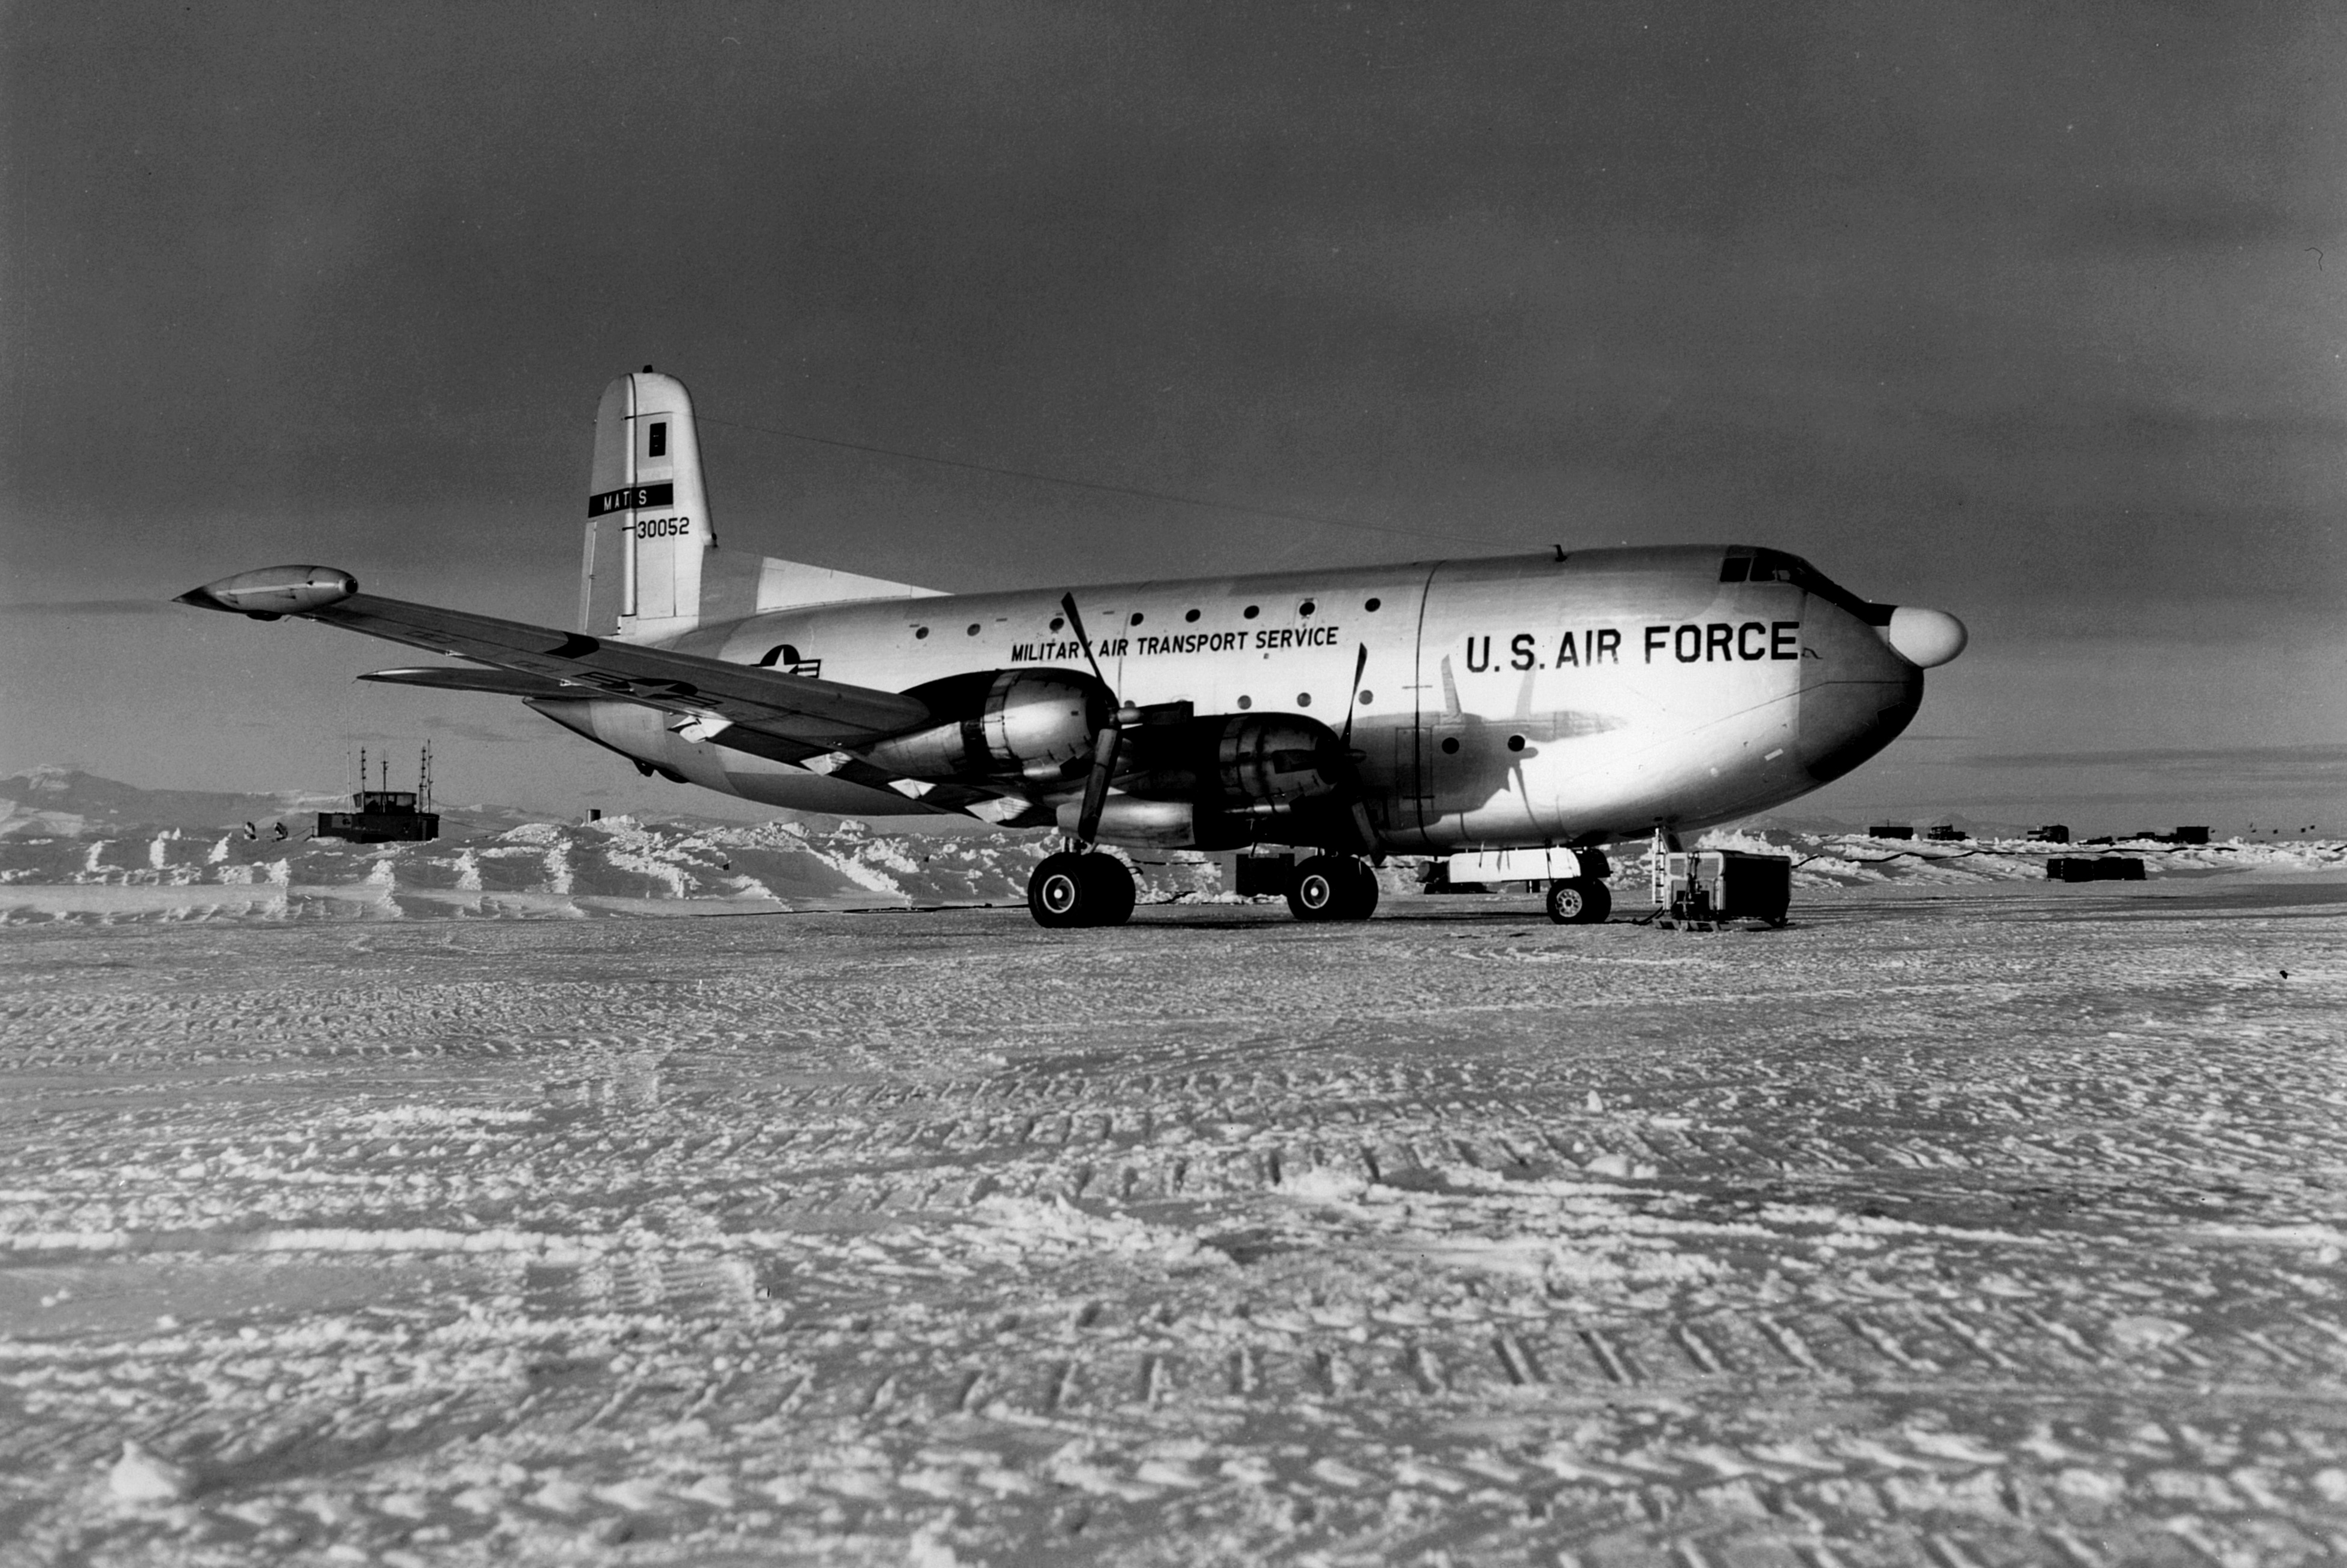 A U.S. Air Force airplane parked on snow.